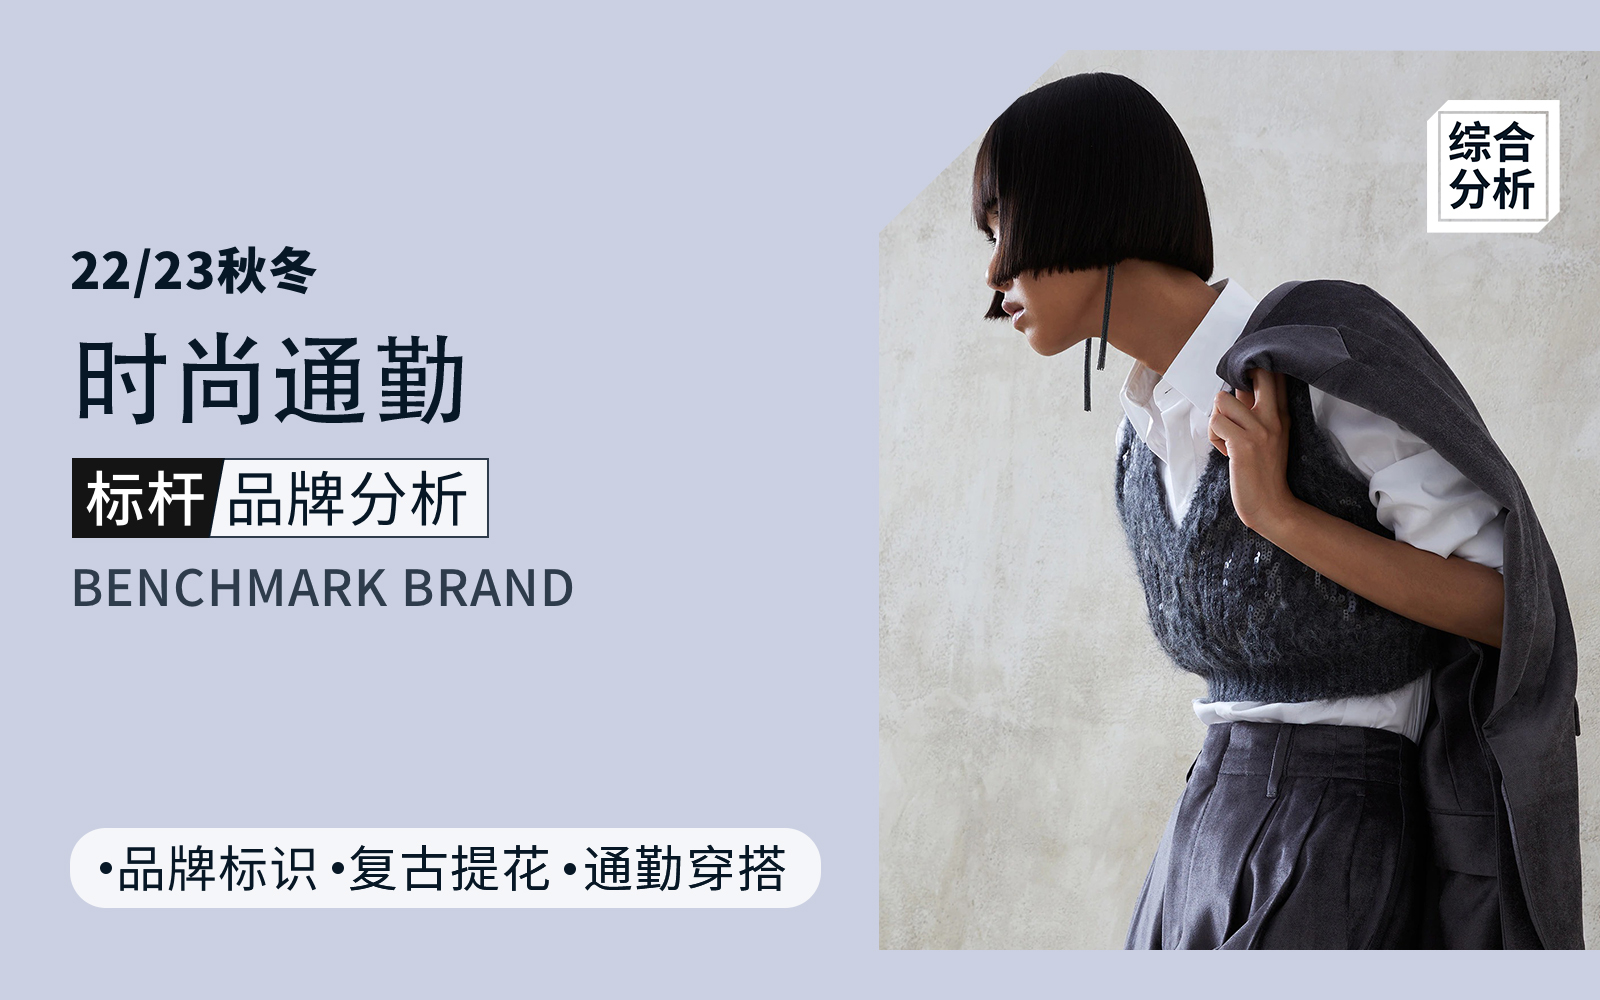 Fashion Commuter -- The Comprehensive Analysis of Benchmark Knitwear Brand for Mature Lady